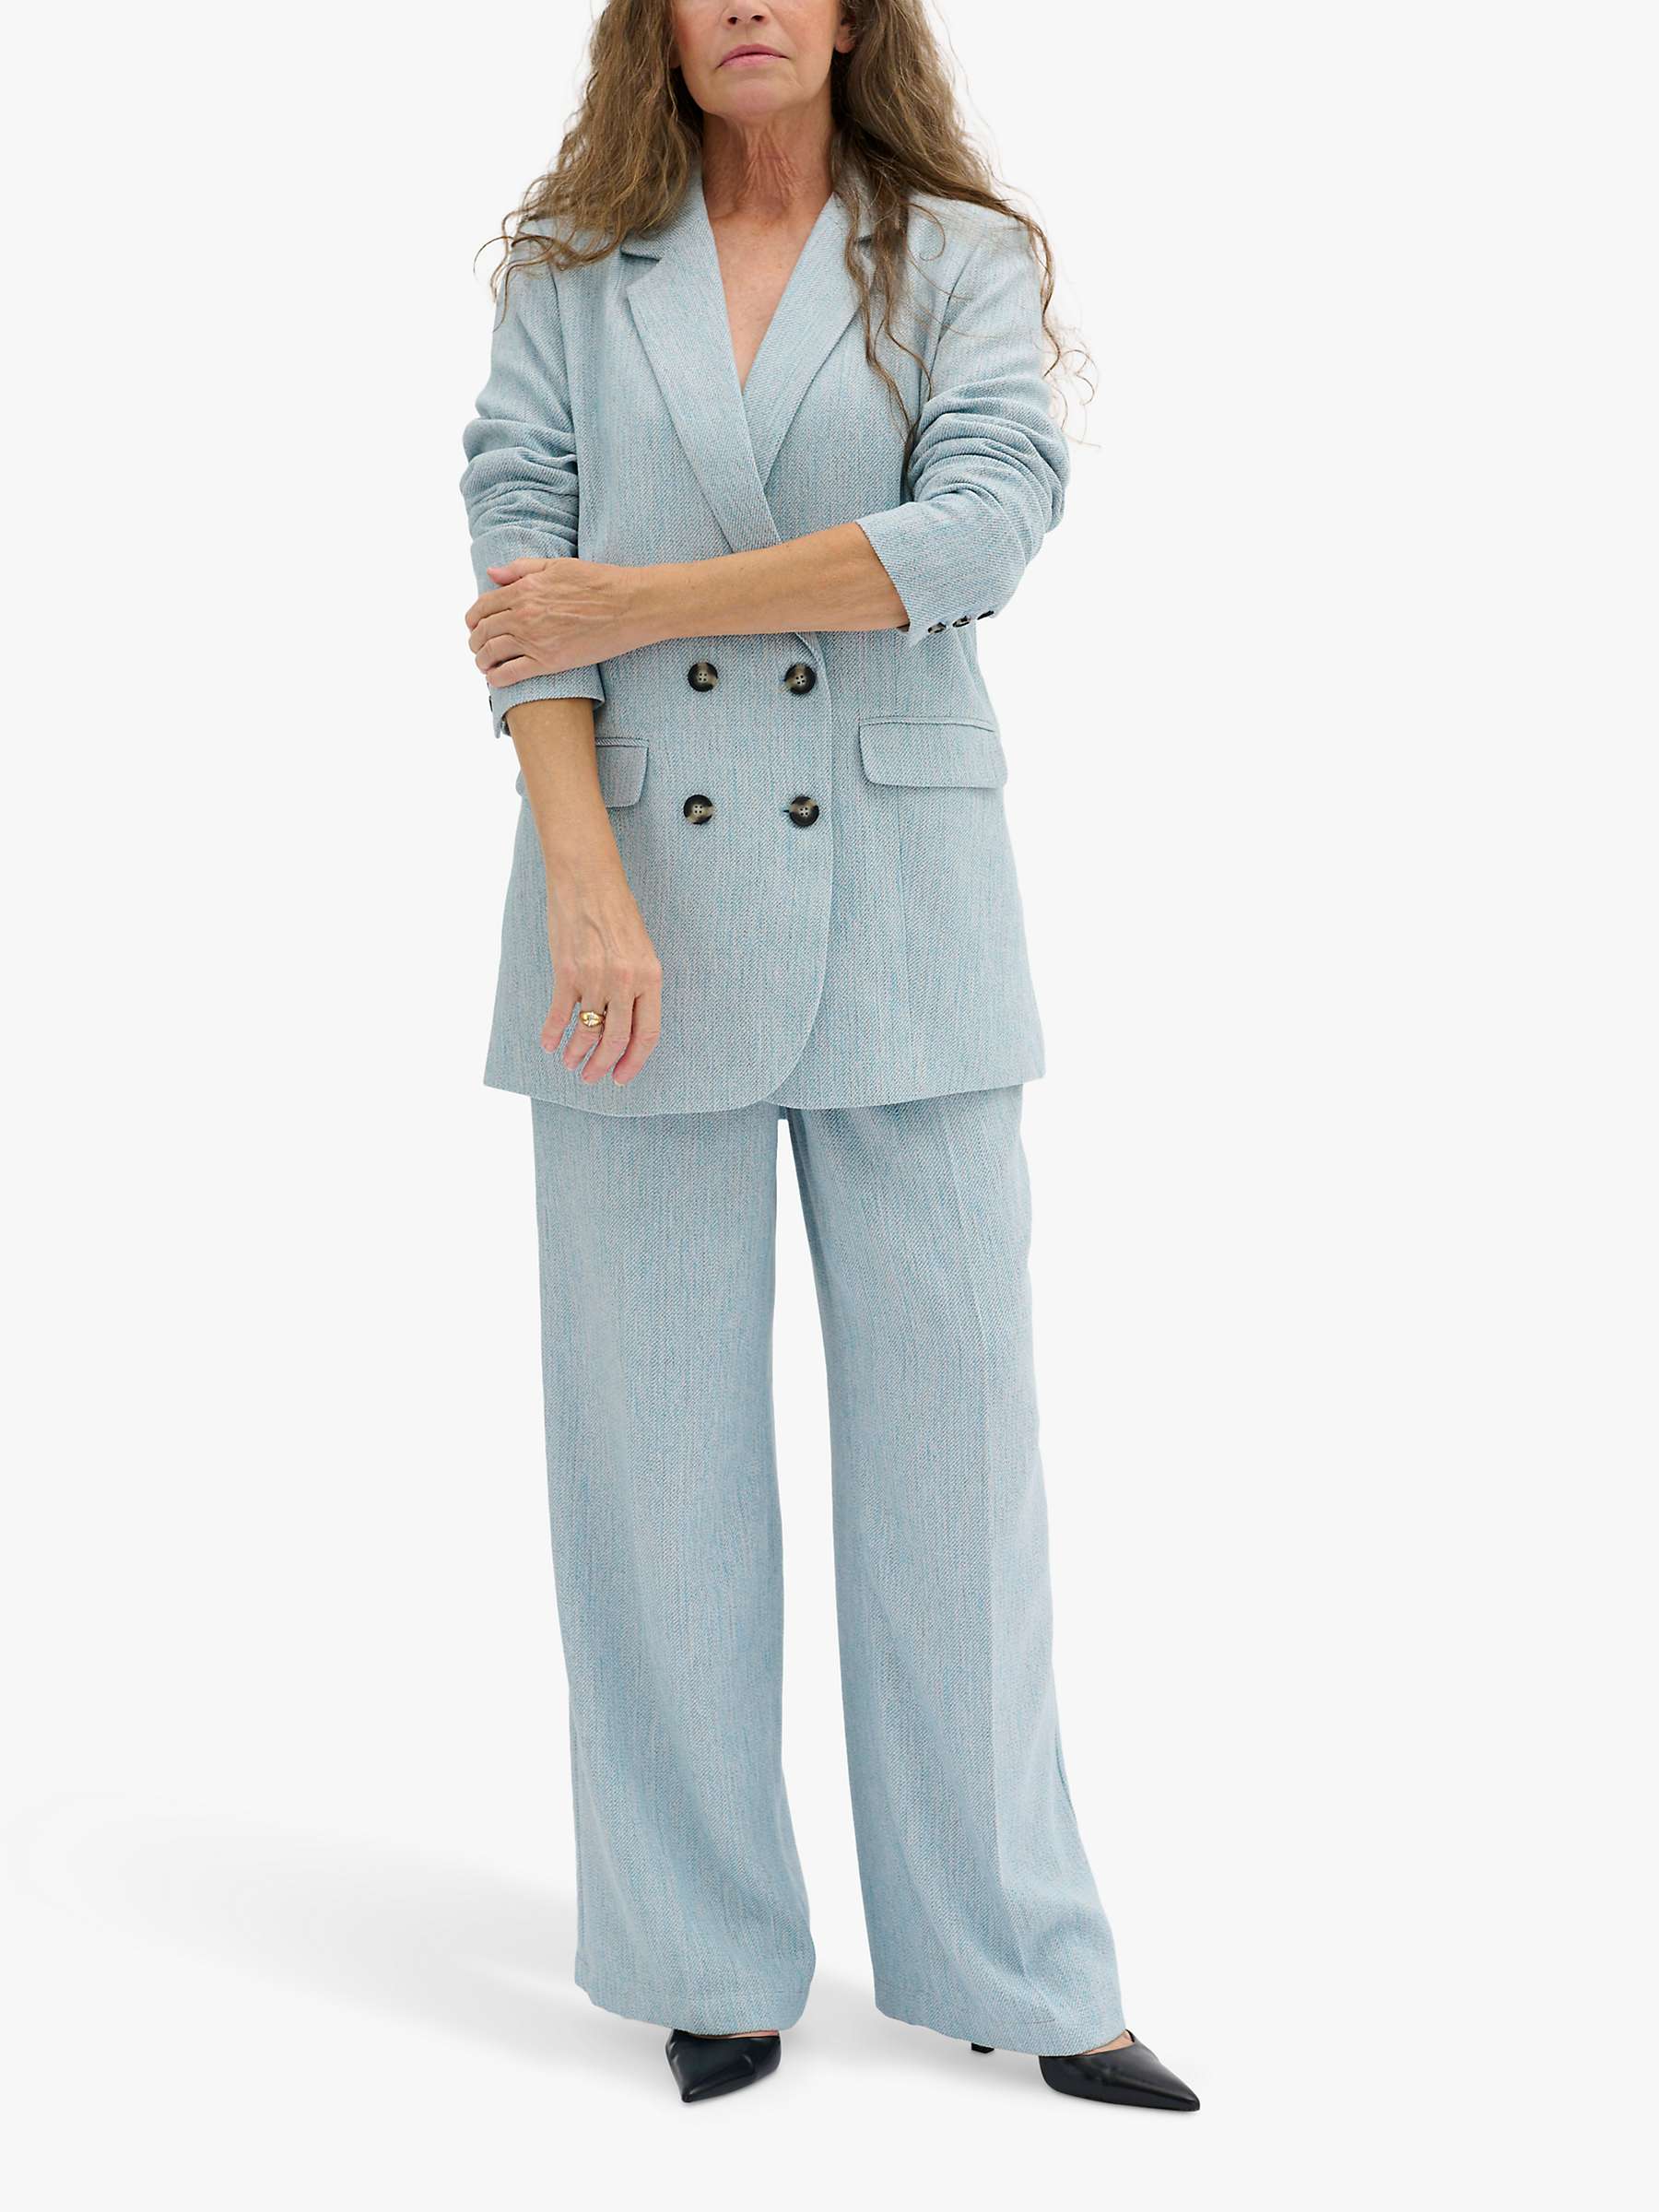 Buy MY ESSENTIAL WARDROBE Elisa Double Breasted Pocket Blazer, Clear Sky Off White Online at johnlewis.com